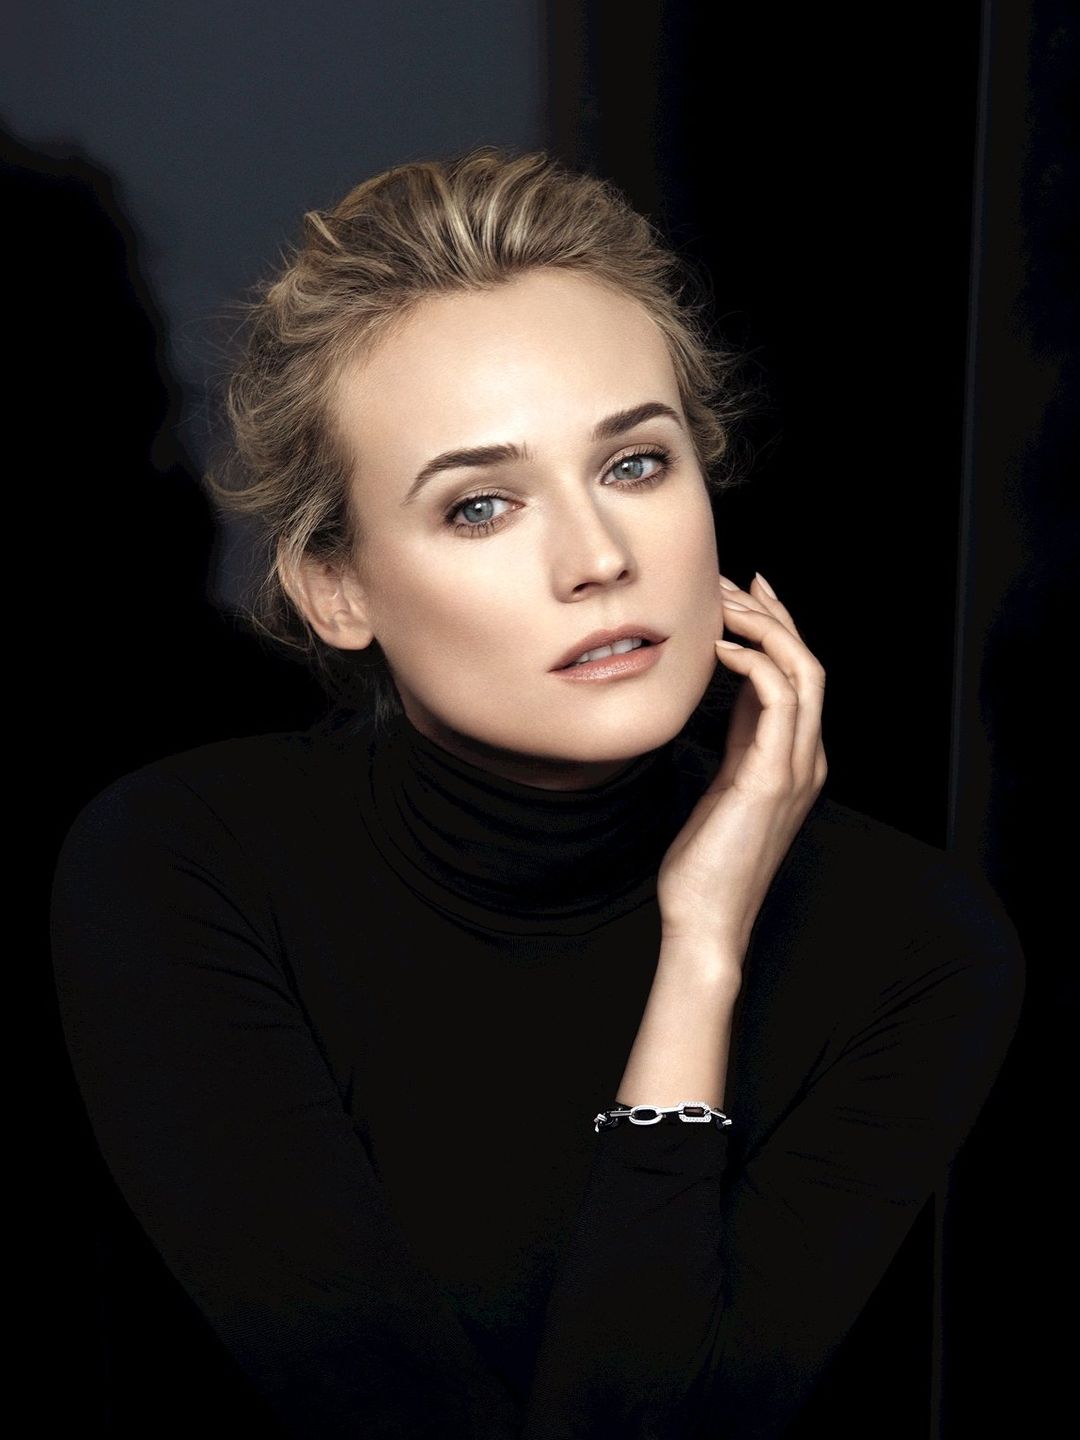 Diane Kruger personal traits